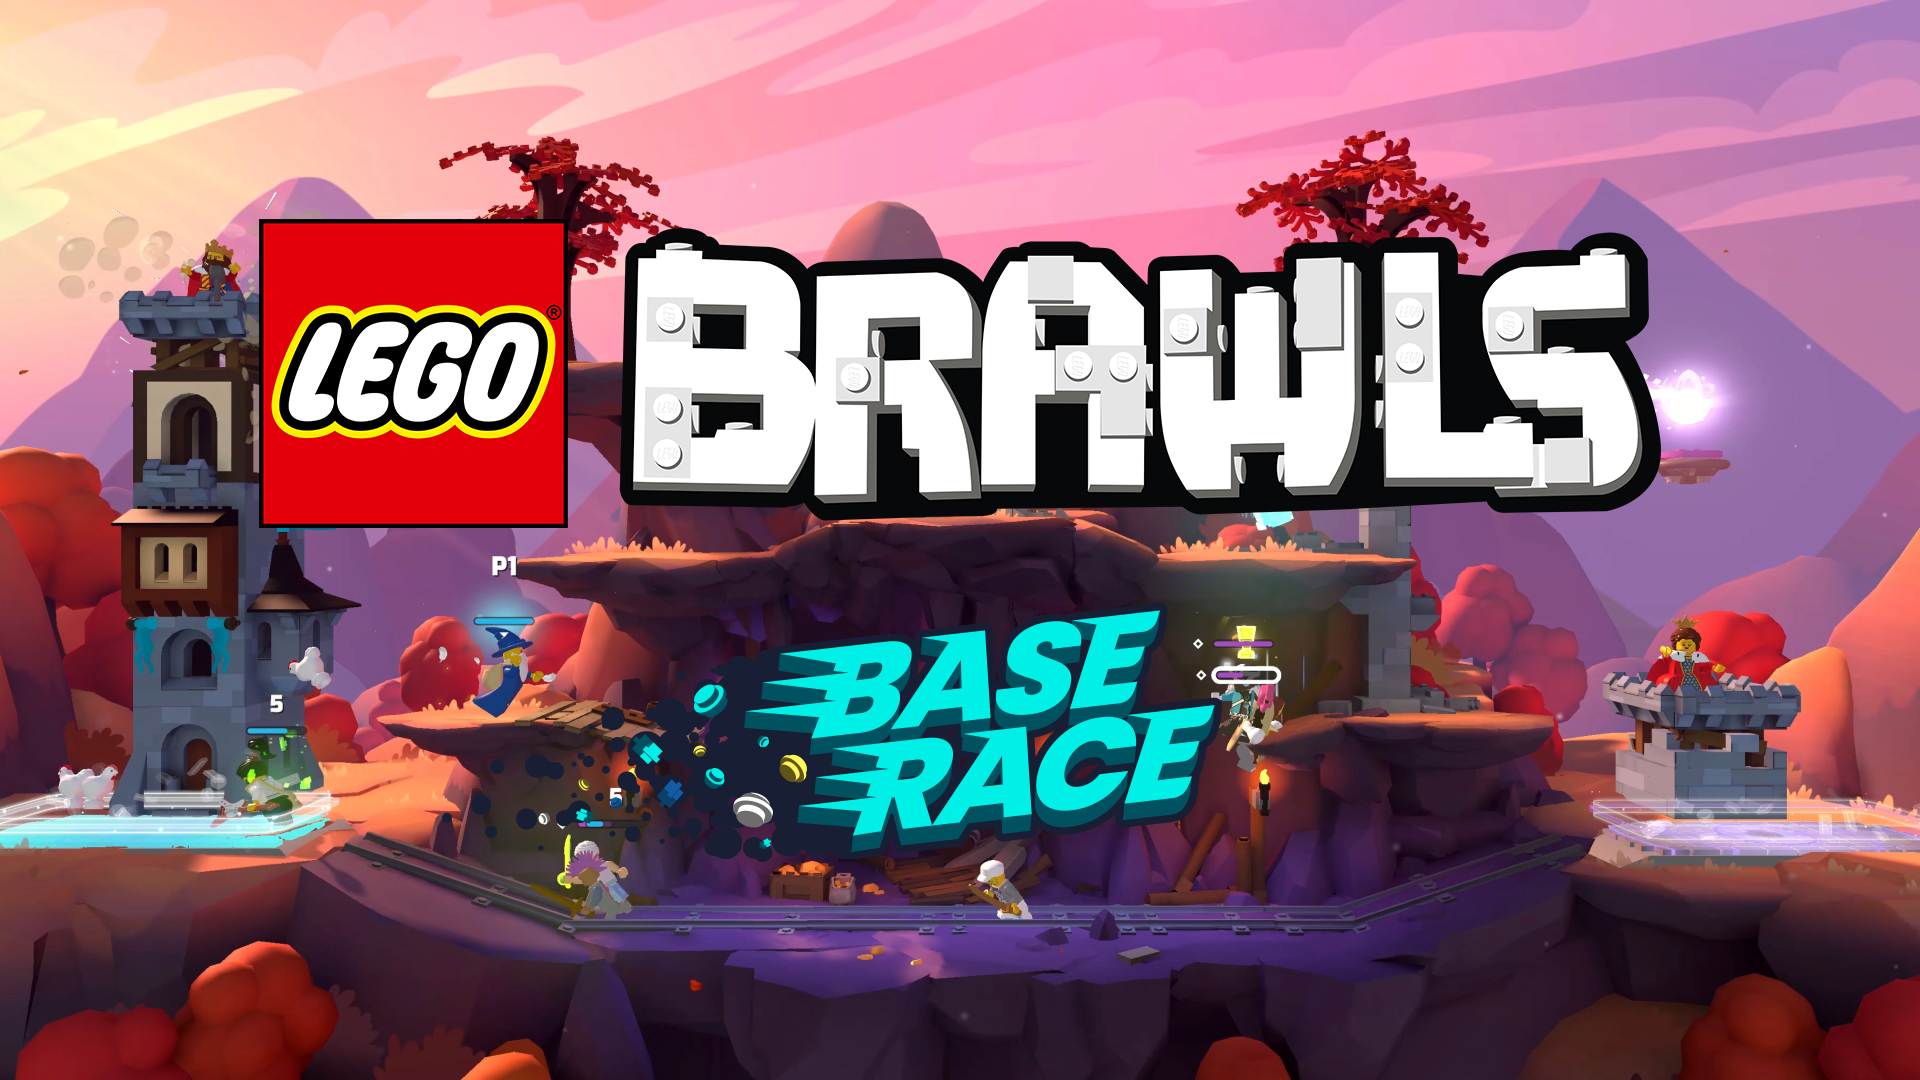 Compete In An Epic Battle For Glory In LEGO Brawls With The Base Race Game Mode and Castle Level Update